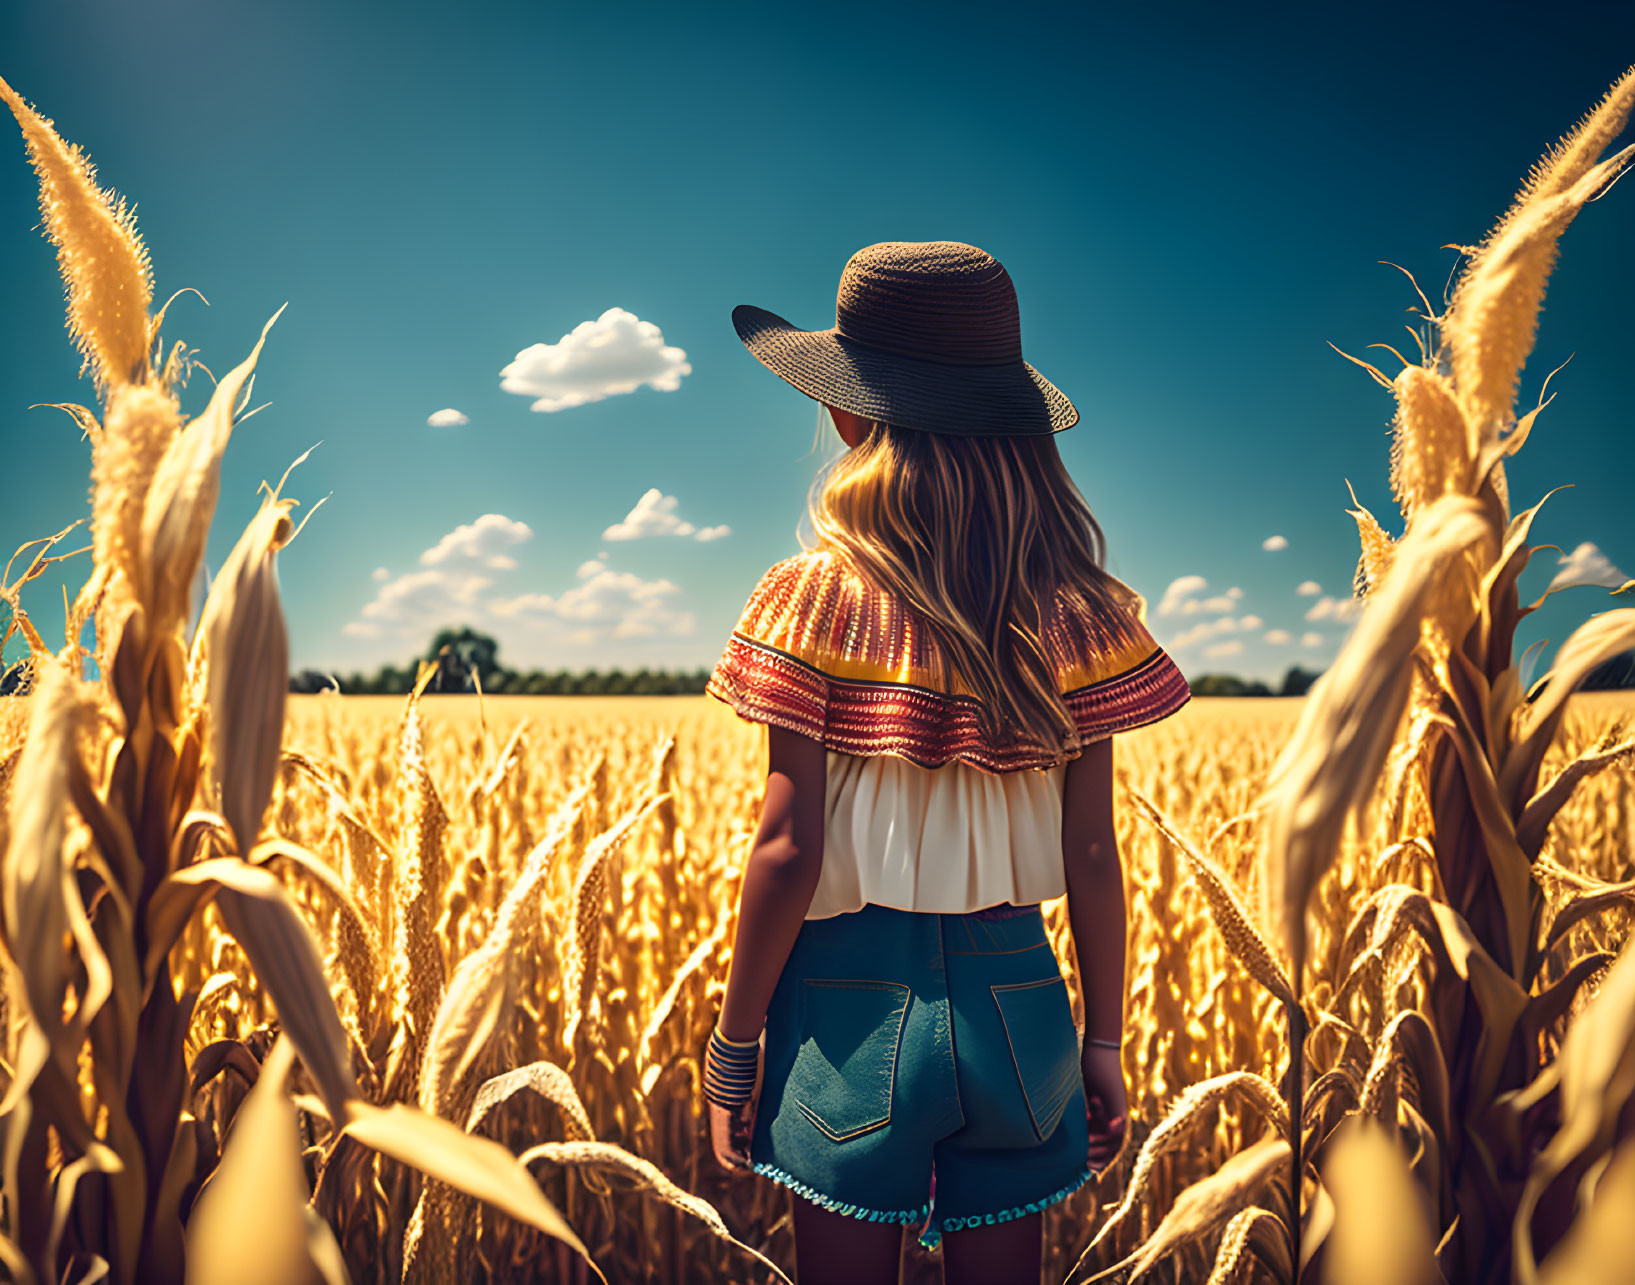 Woman in straw hat and colorful top in cornfield under clear sky